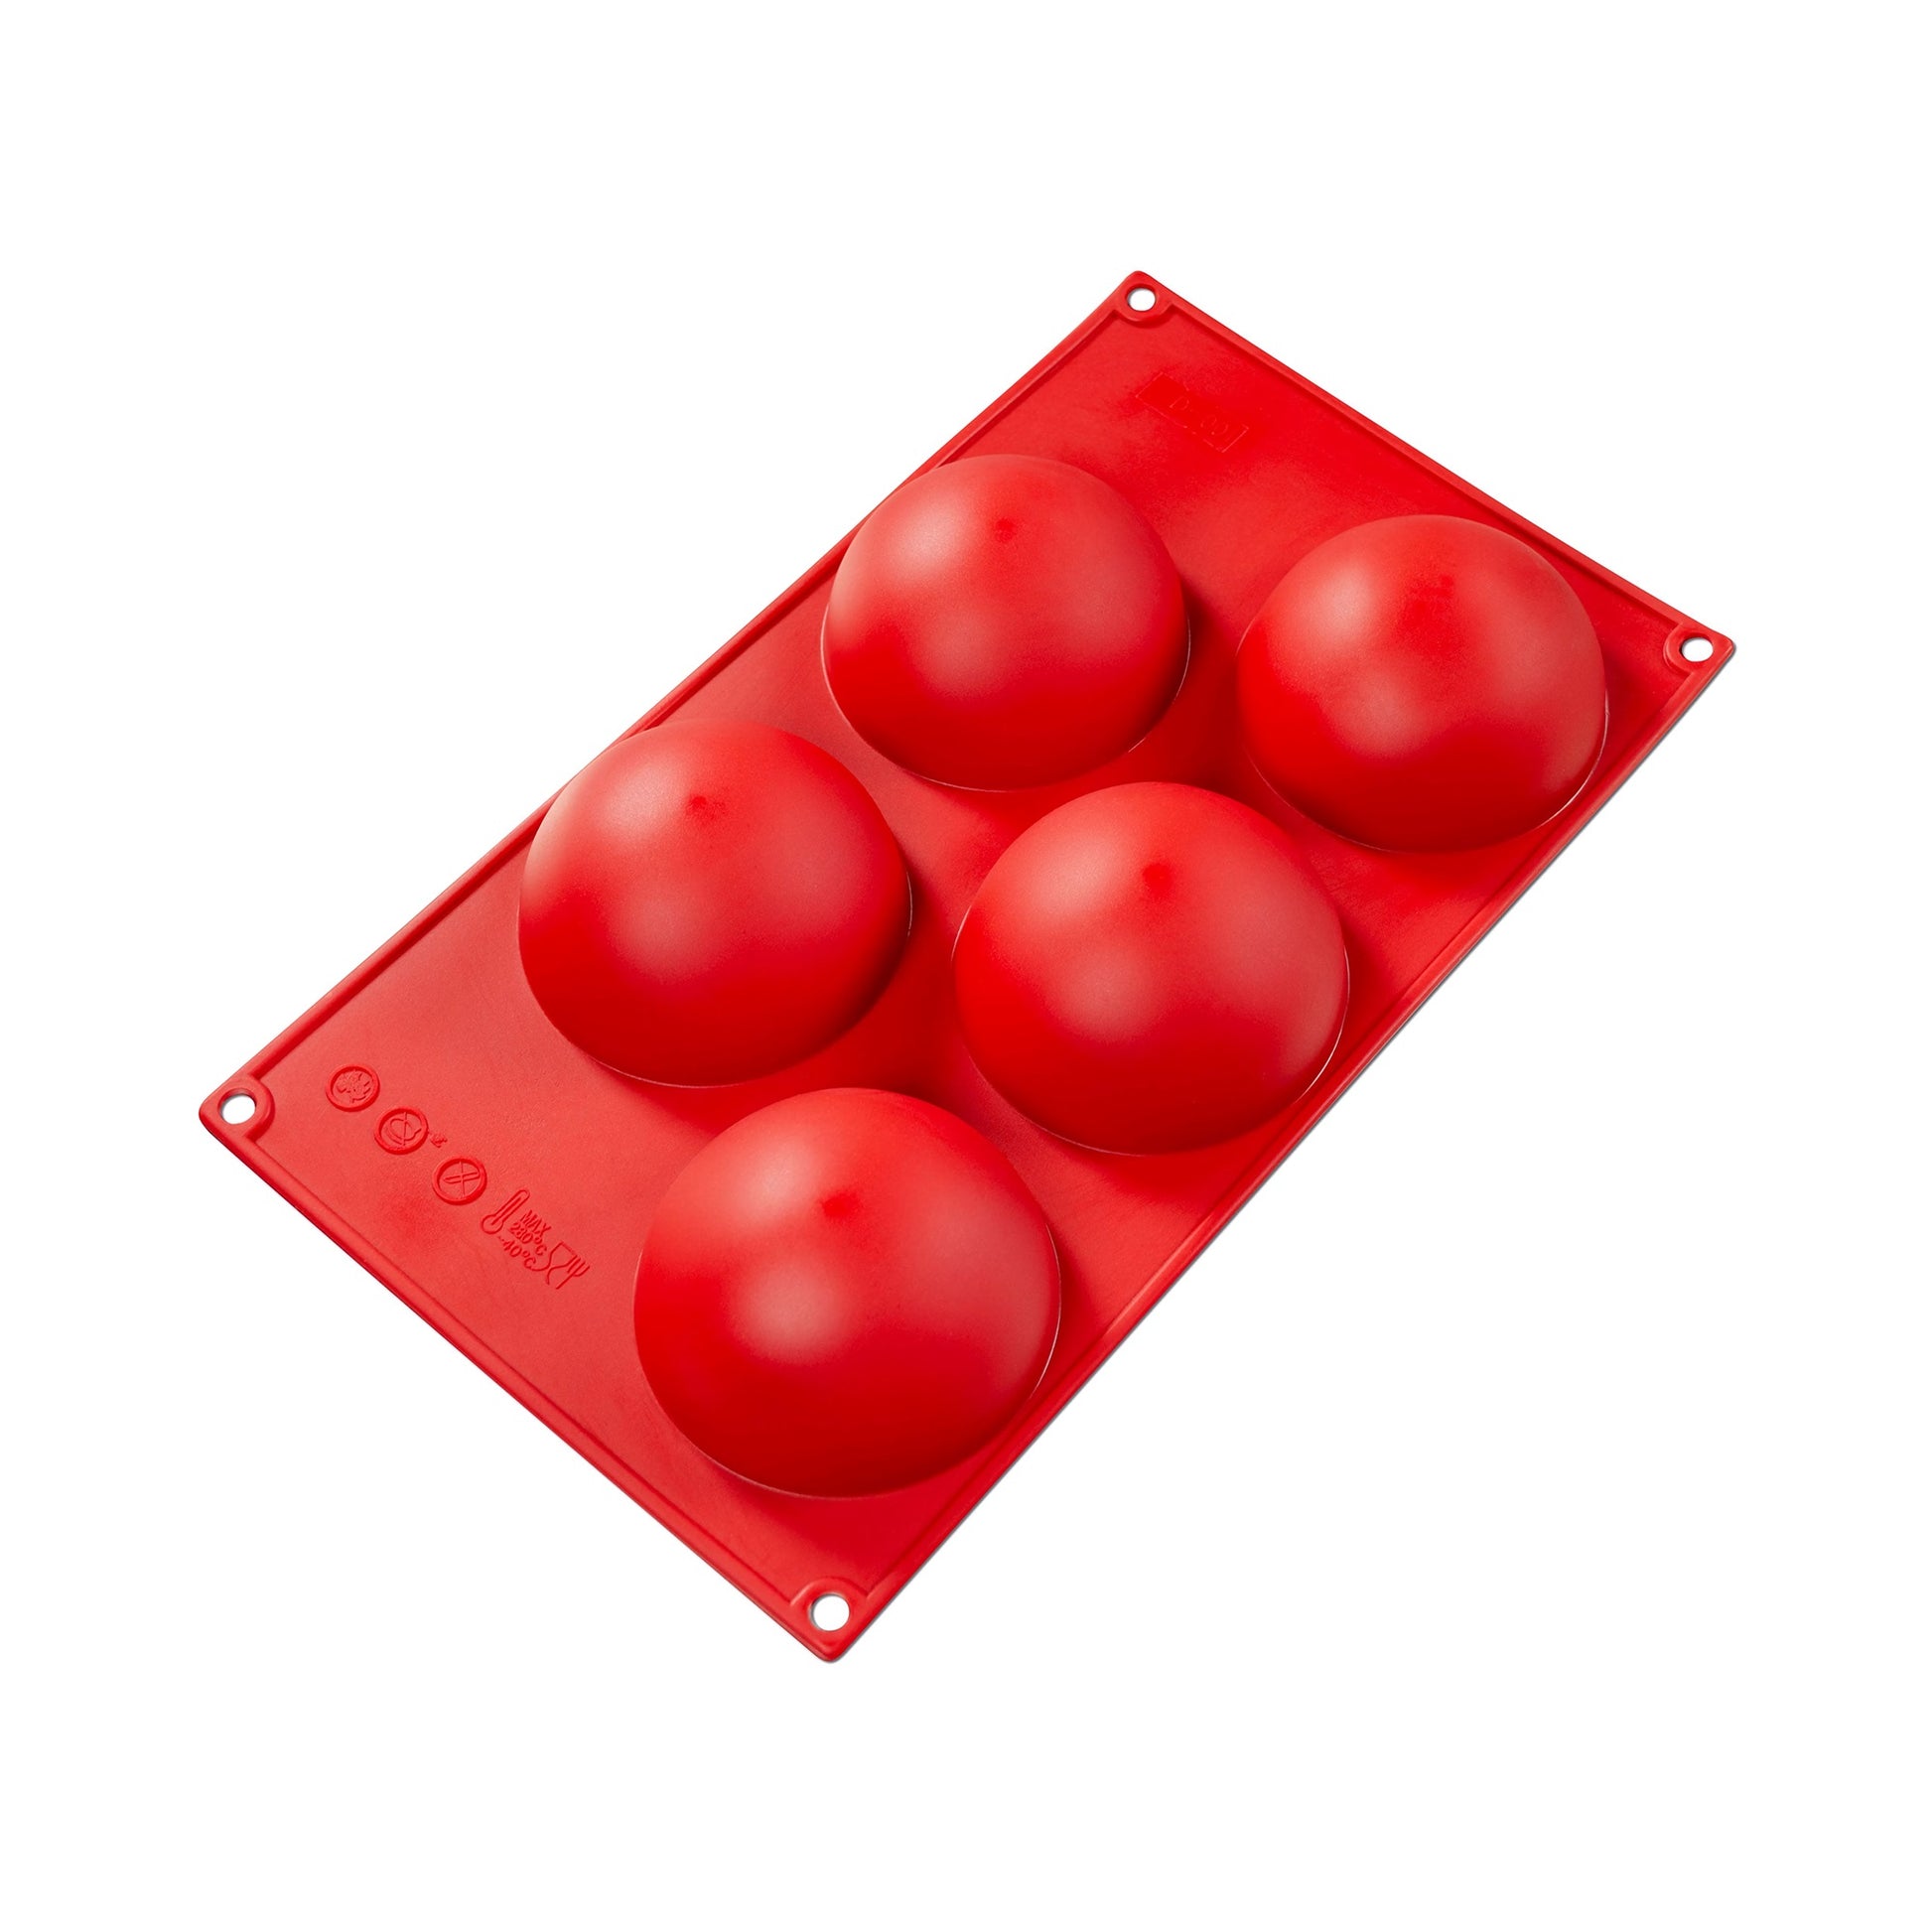 The bottom view of a red silicone hemisphere mold, displaying the five rounded protrusions that form the base of each cavity when inverted. The mold, marked with 'Fat Daddio’s' and the cavity size, signifies the brand and capacity. The mold's design, with holes at each corner for easy handling, is ideal for creating perfectly rounded culinary delights like mousse domes, ice cream bombe, or chocolate spheres.